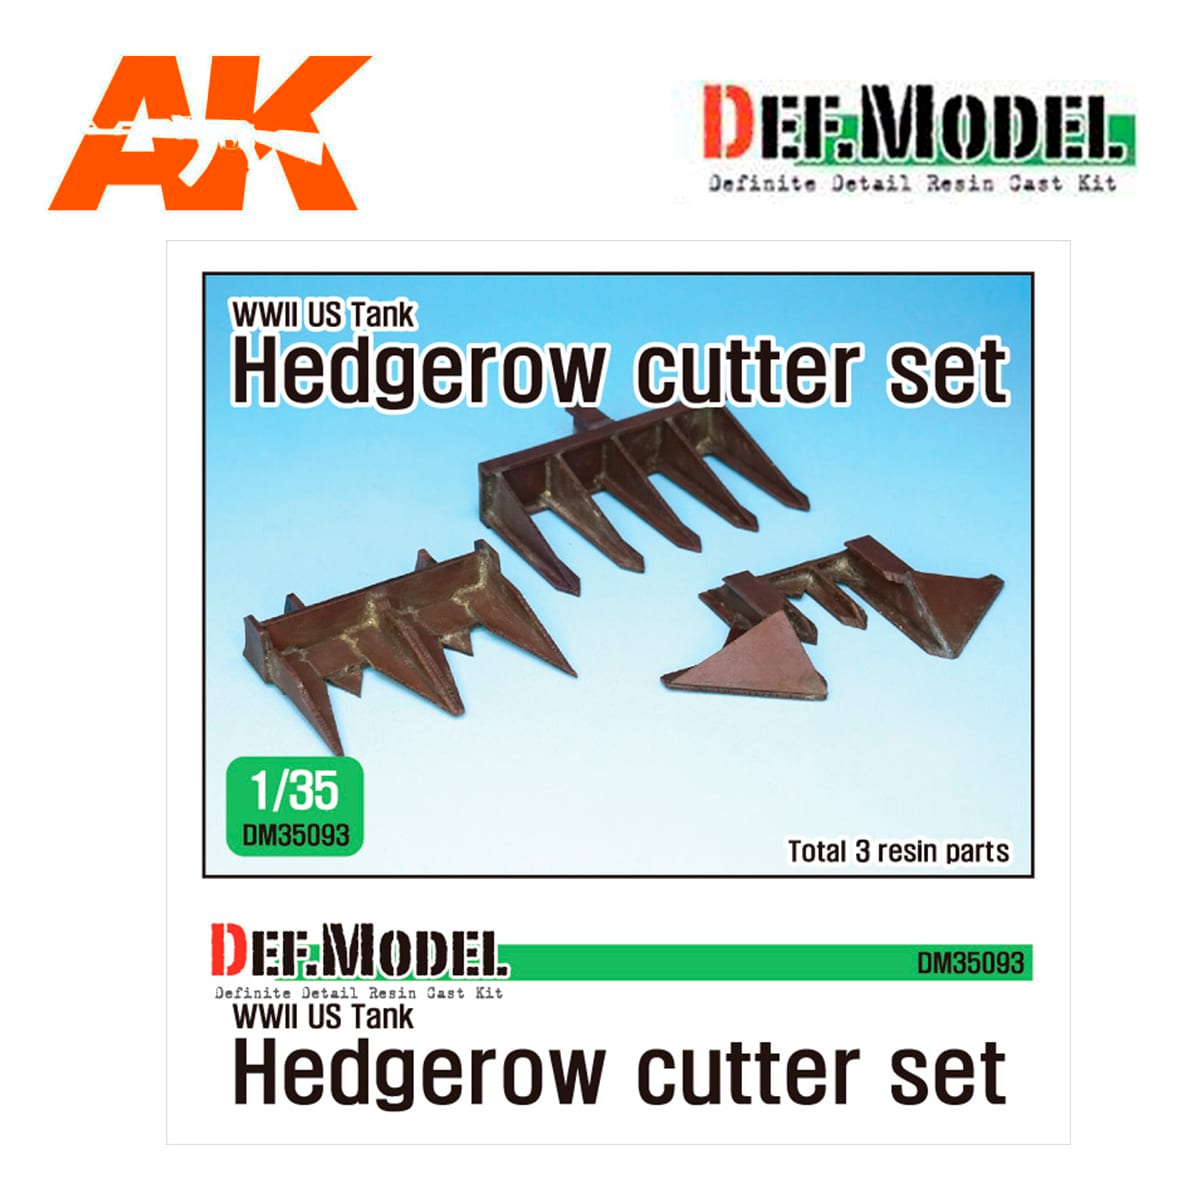 WWII US Tank hedgerow cutter set ( for 1/35 Tamiya kit)